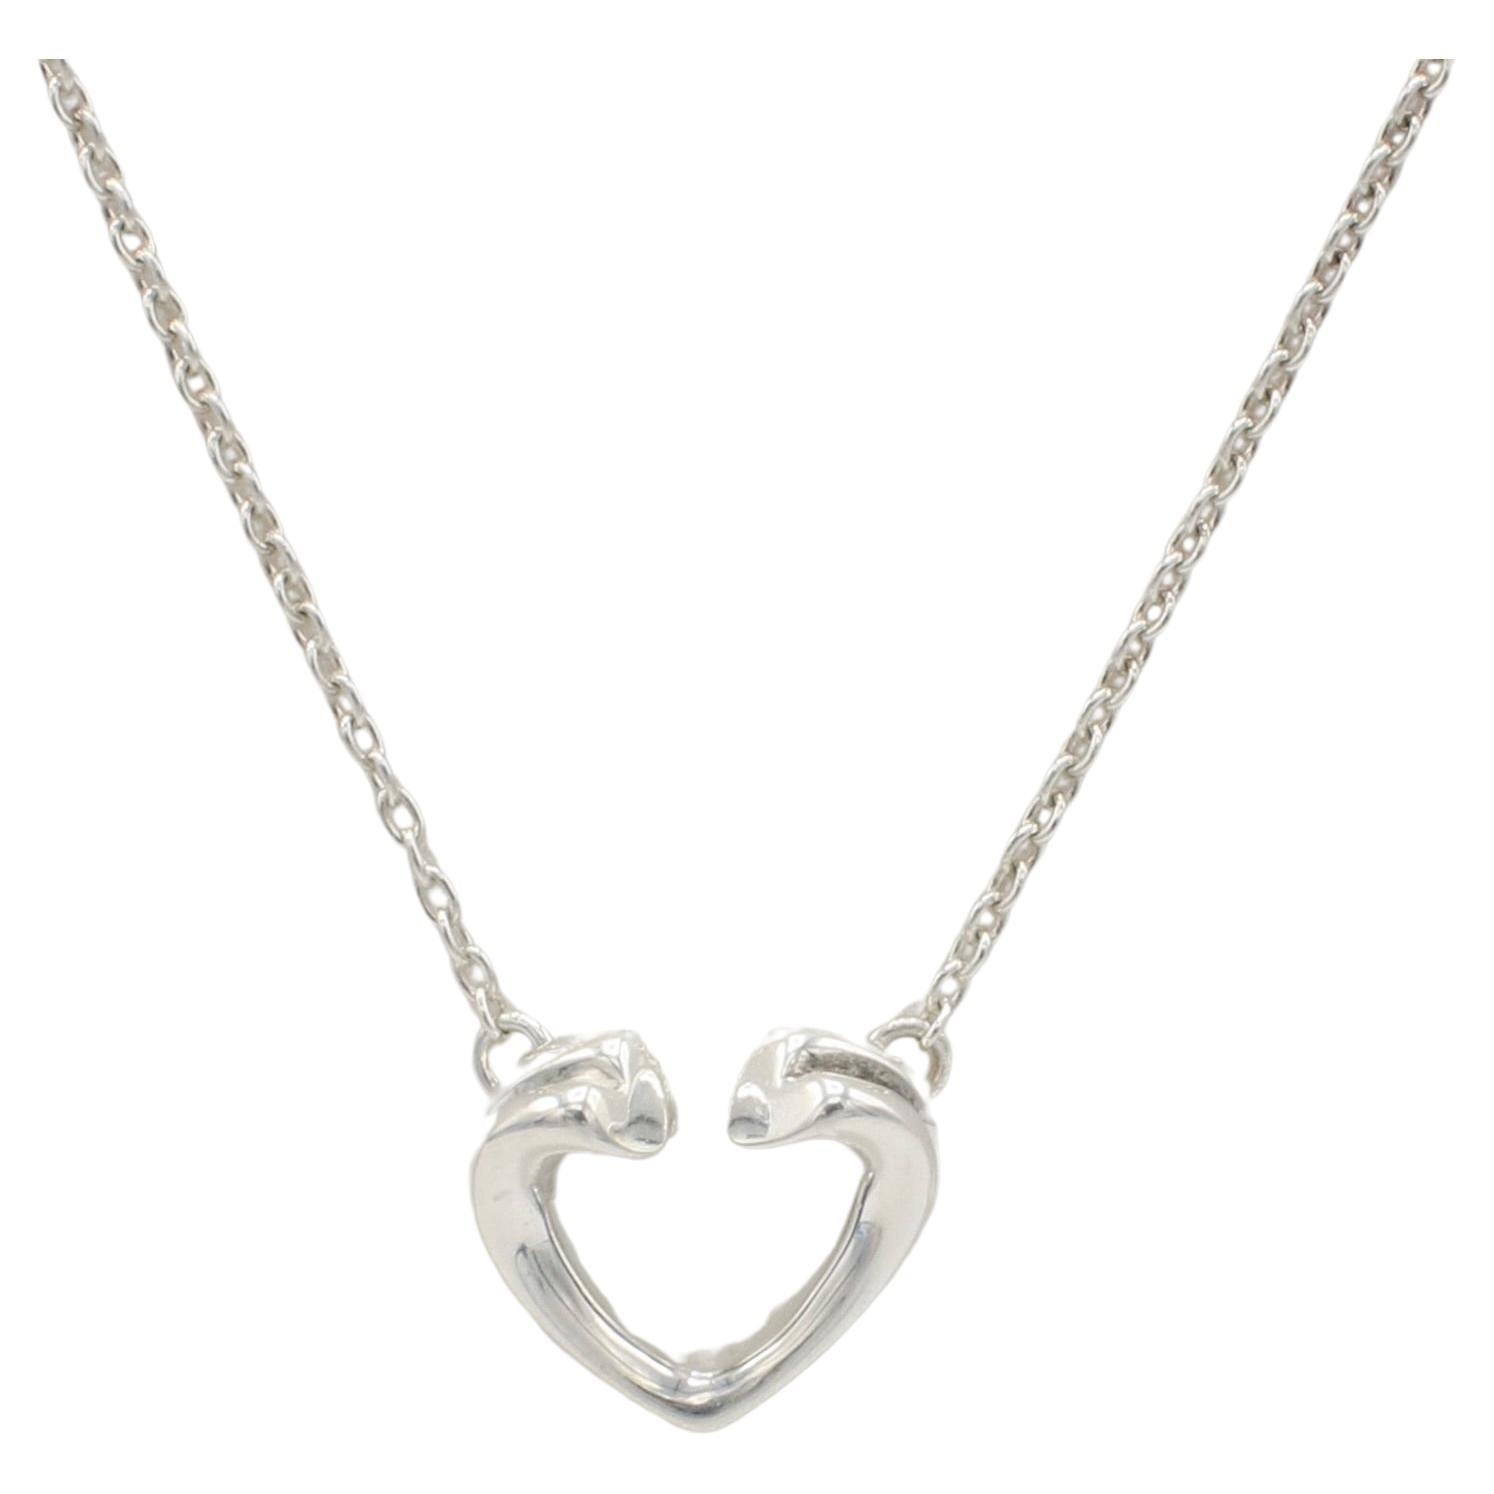 Tiffany & Co. Paloma Picasso Sterling Silver Tenderness Heart Pendant Necklace 
Metal: Stelring silver 925
Weight: 1.93 grams
Heart: 9 x 10mm
Chain: 16 inches
Signed: T&Co. 925 Paloma Picasso 